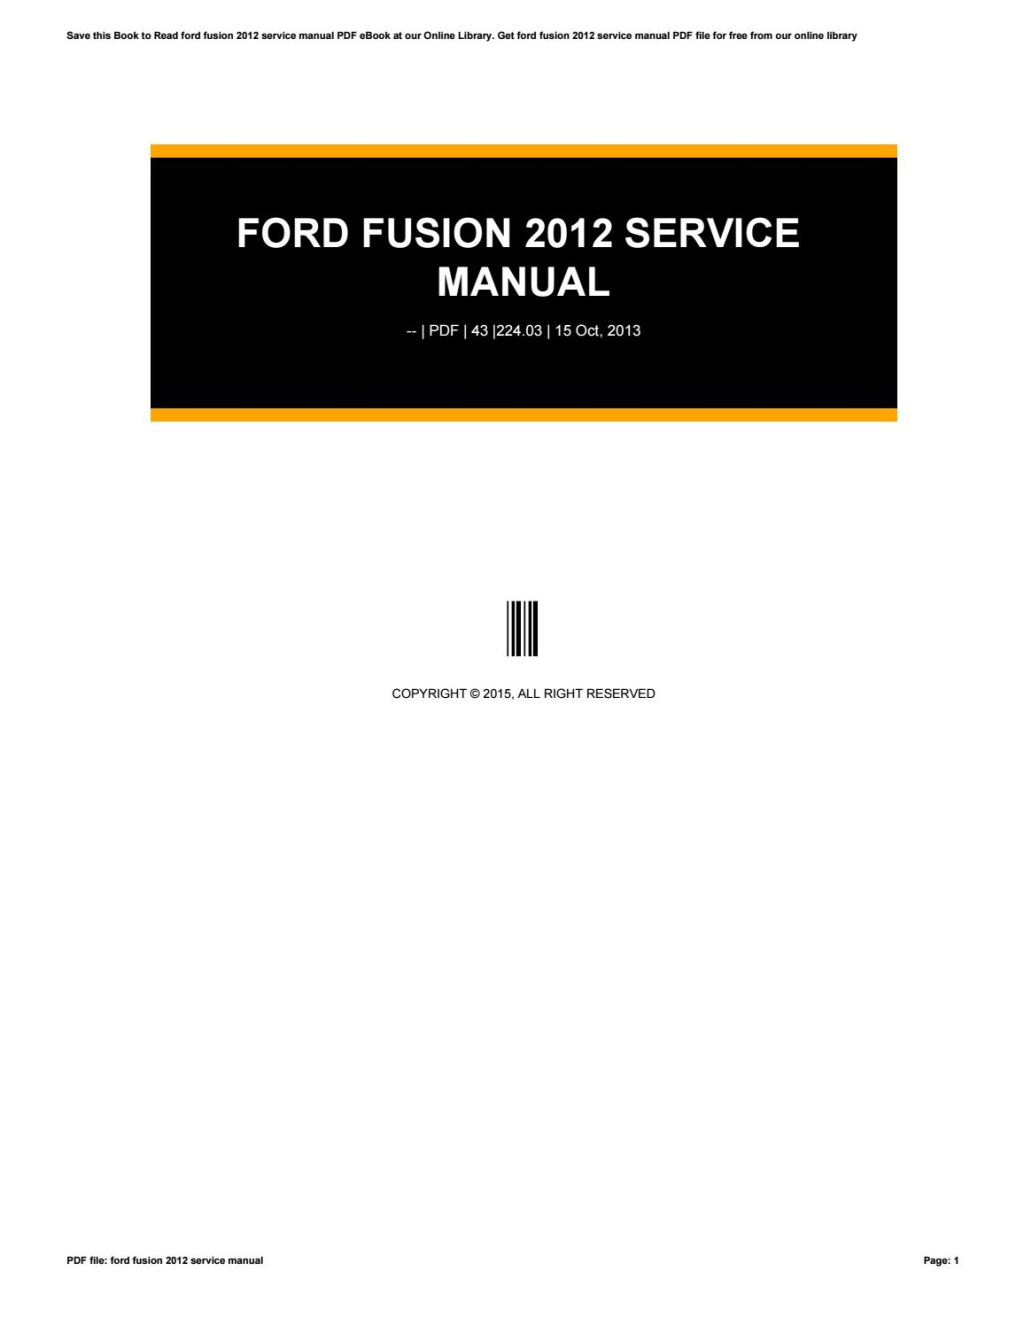 Picture of: Ford fusion  service manual by HeatherSpiker – Issuu